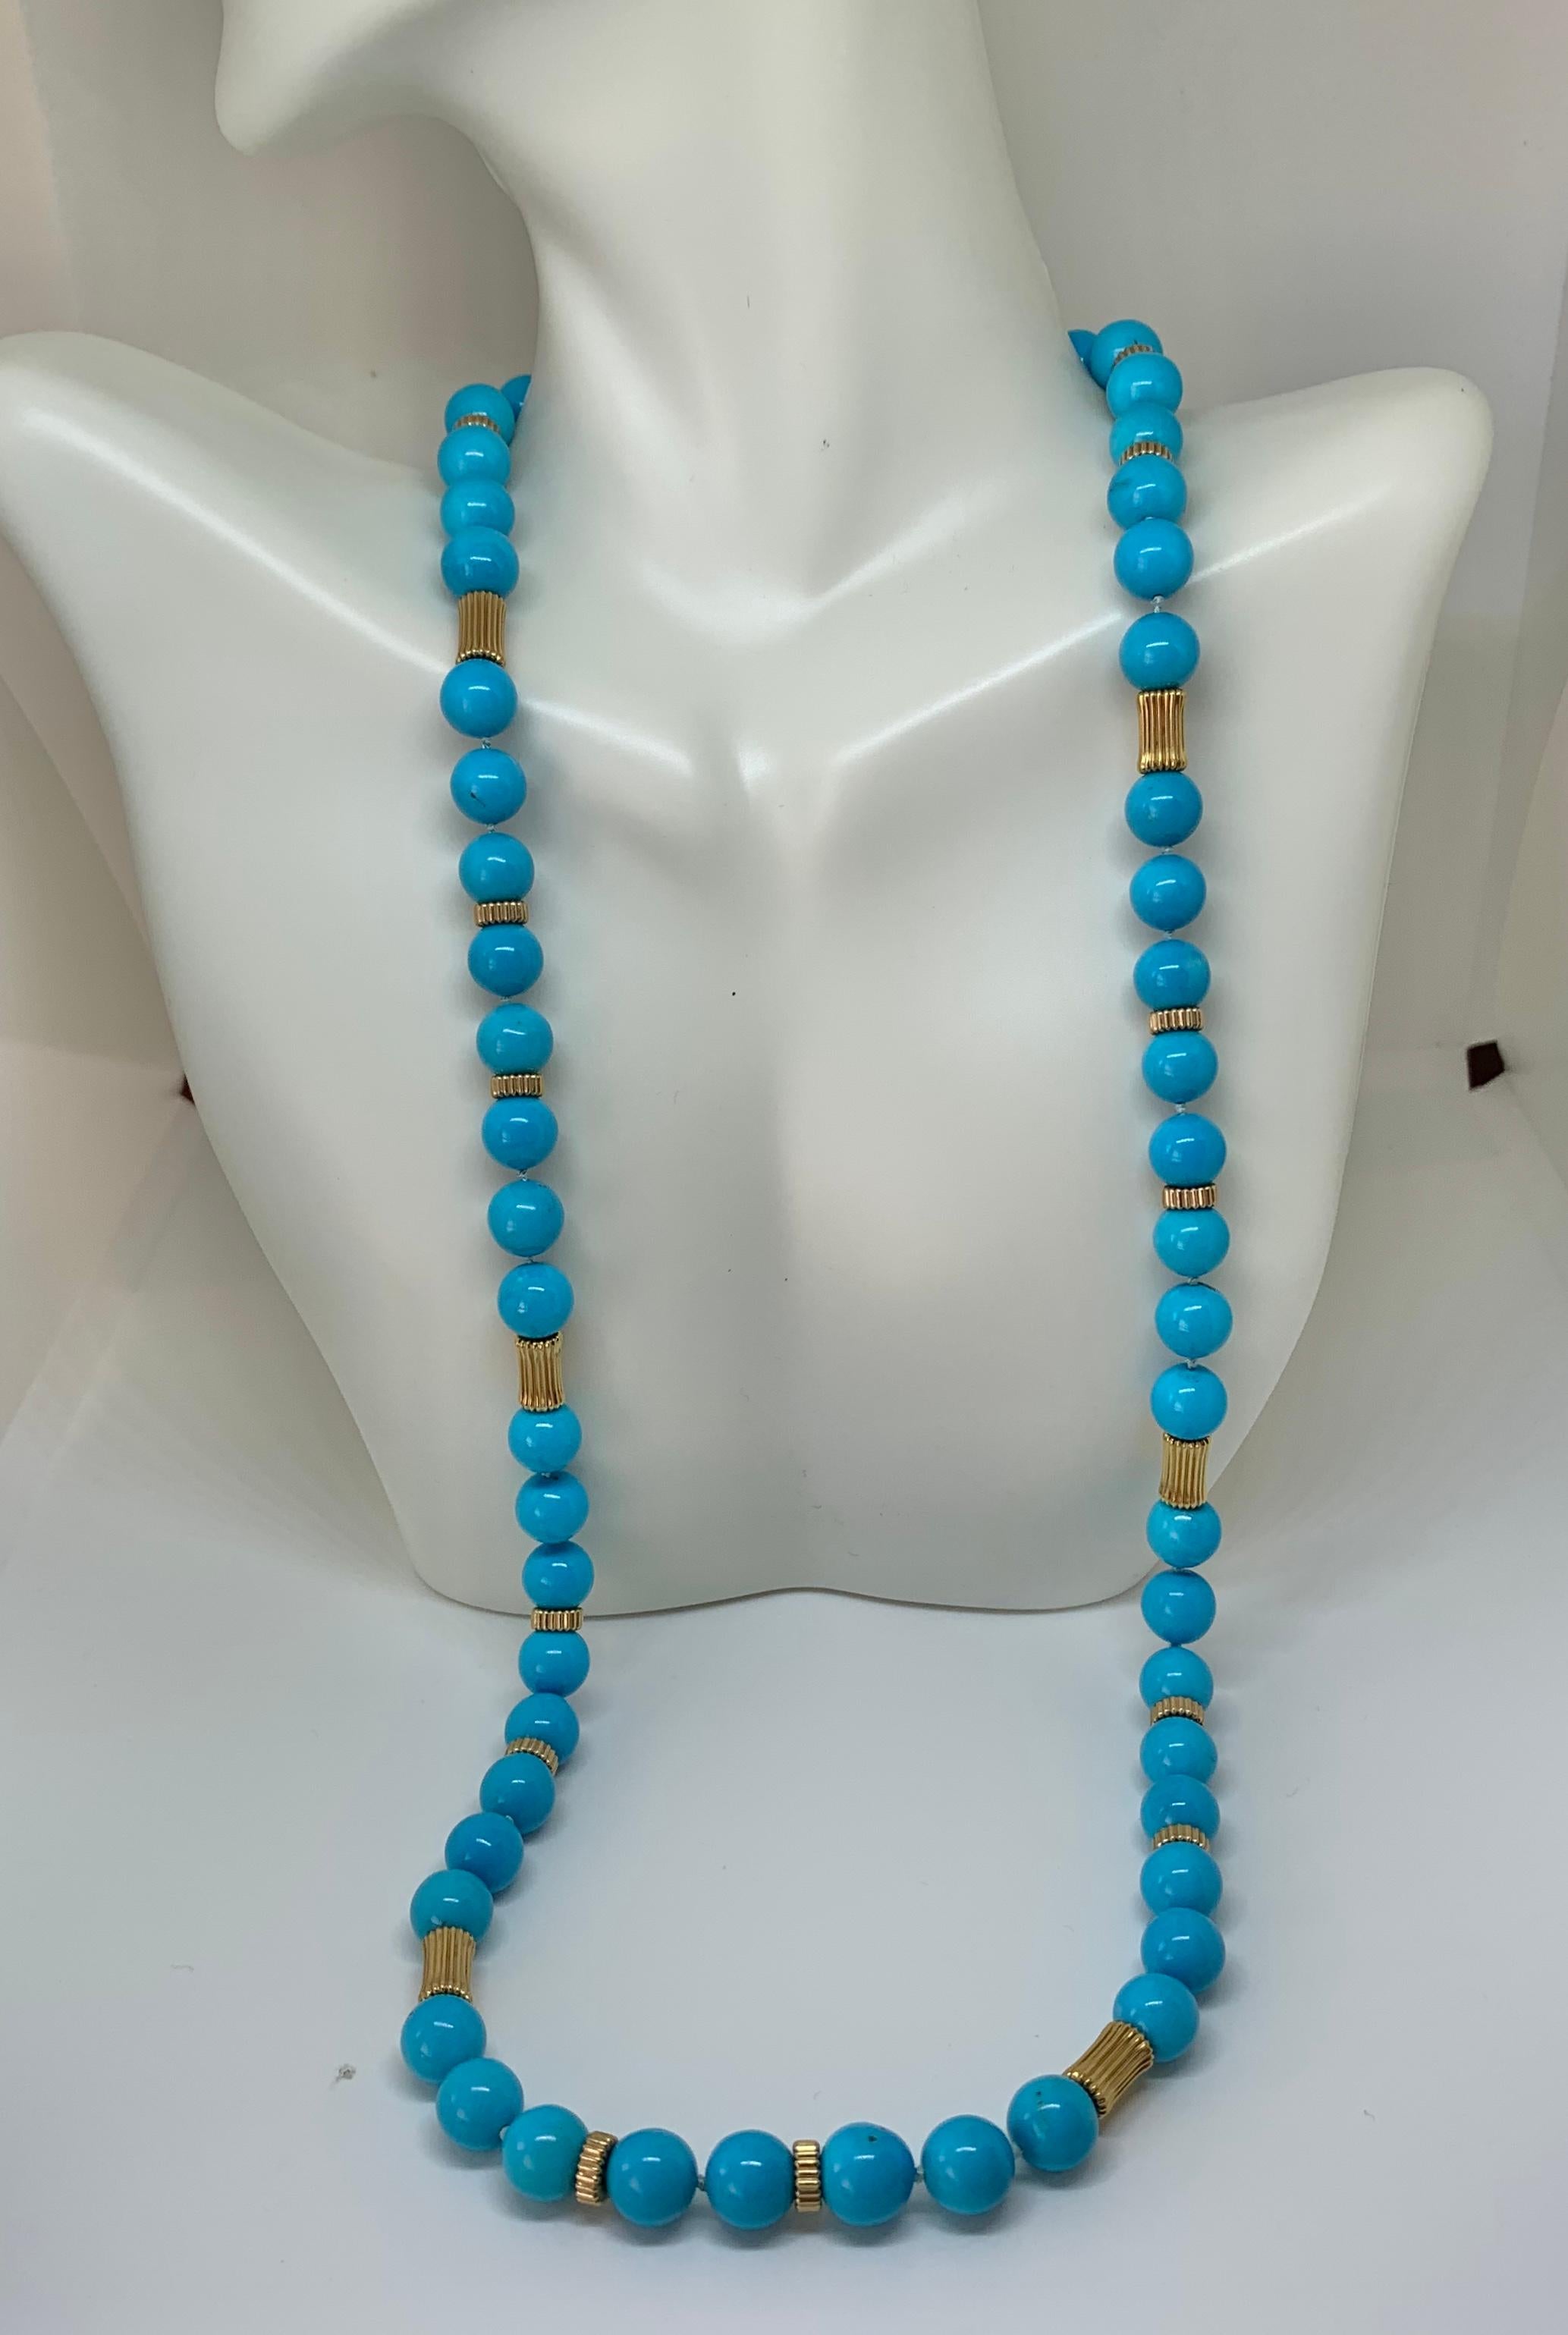 This is a spectacular antique Persian Turquoise and 14 Karat Yellow Gold Necklace.  The natural mined turquoise is the most exquisite vivid robin's egg blue.  The color of the turquoise is the absolute finest color of turquoise.  The exquisite